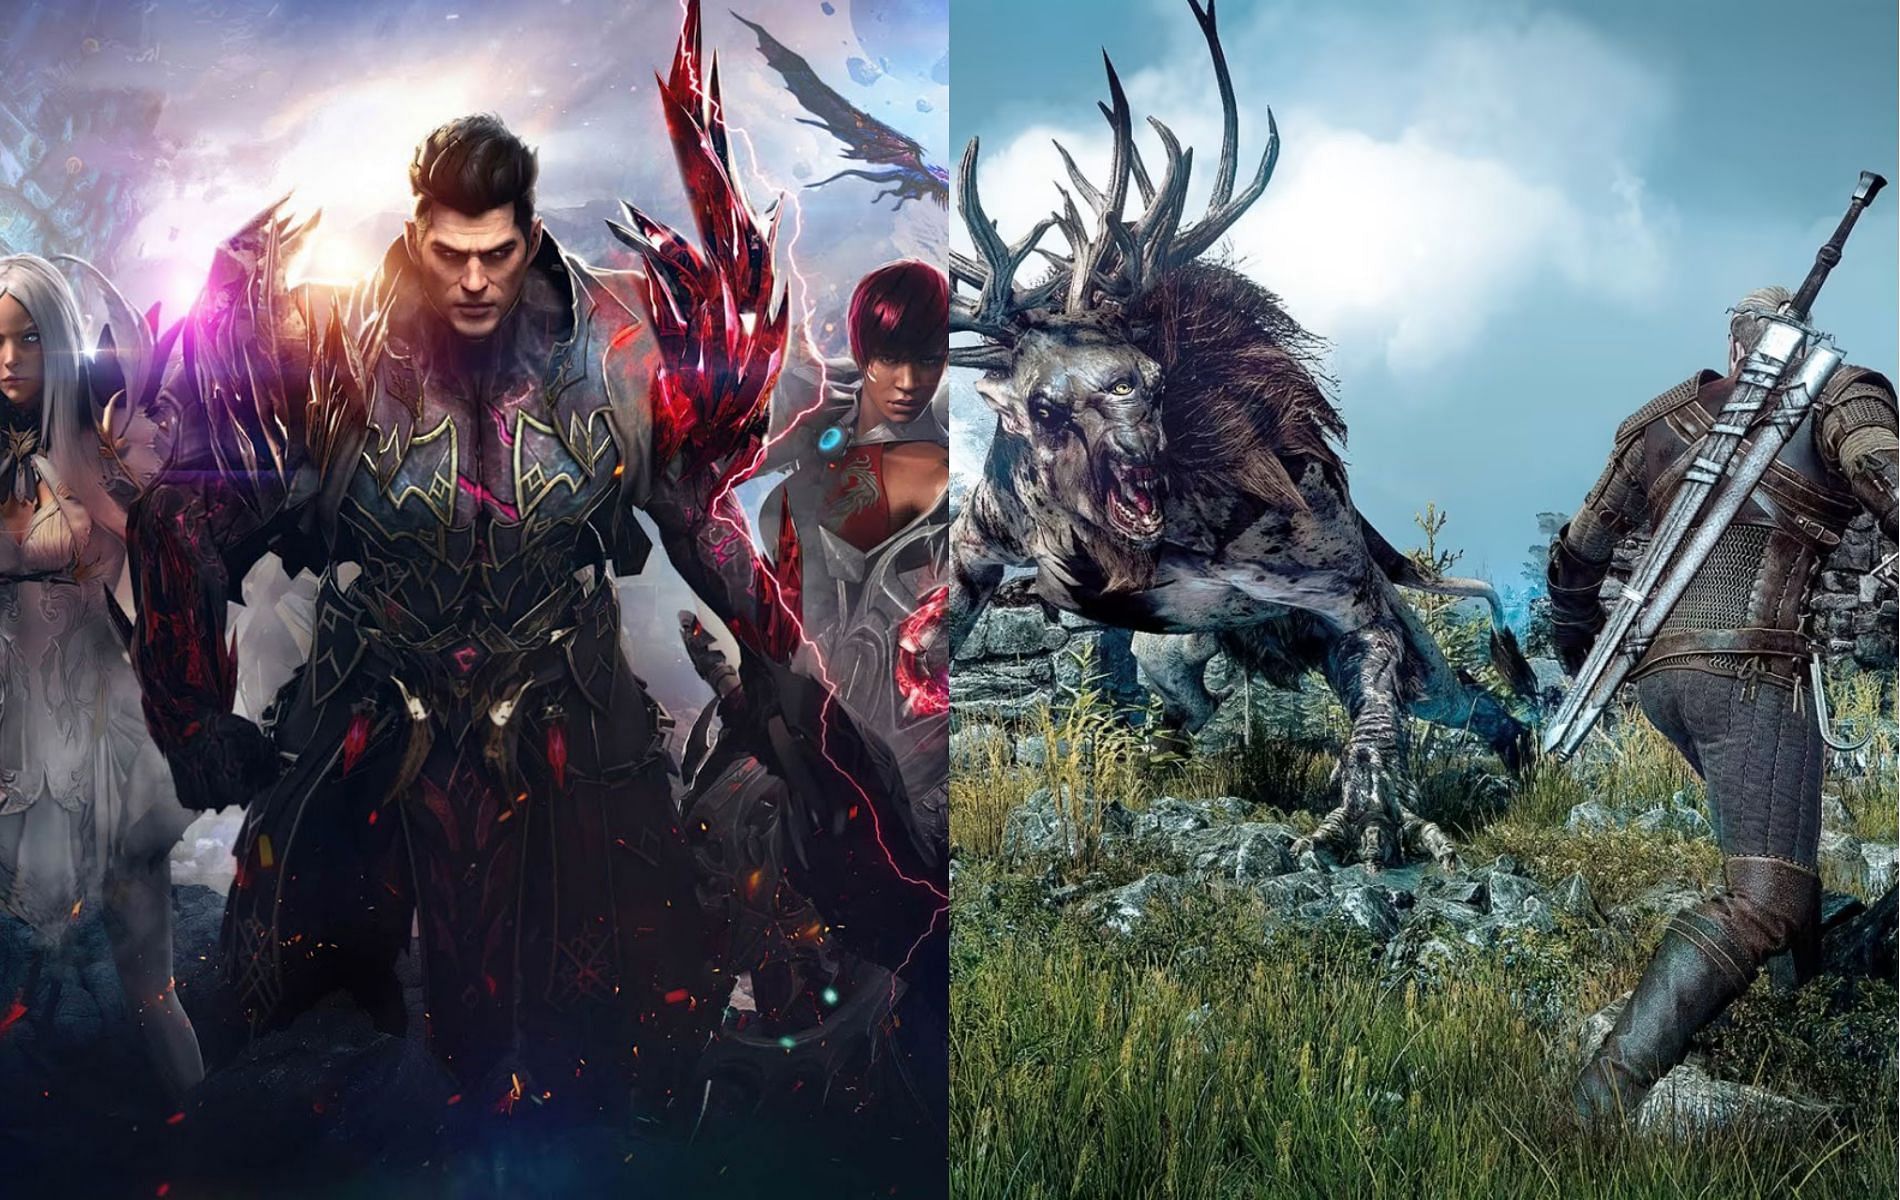 Interesting additions are coming to this acclaimed Korean MMORPG in the future (Images via Smilegate/CD Projekt RED)